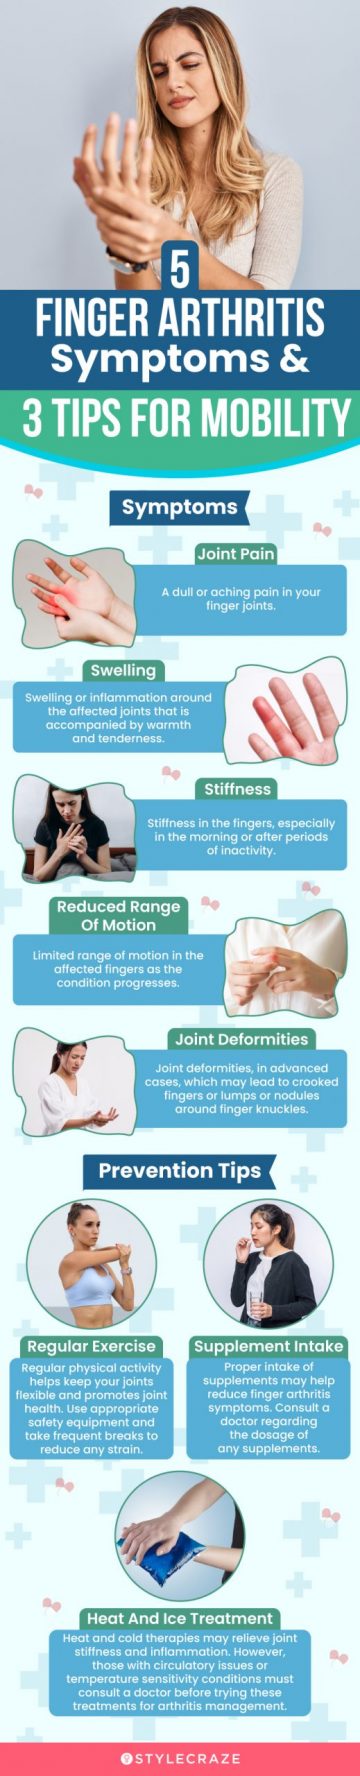 5 finger arthritis symptoms and 3 tips for mobility (infographic)